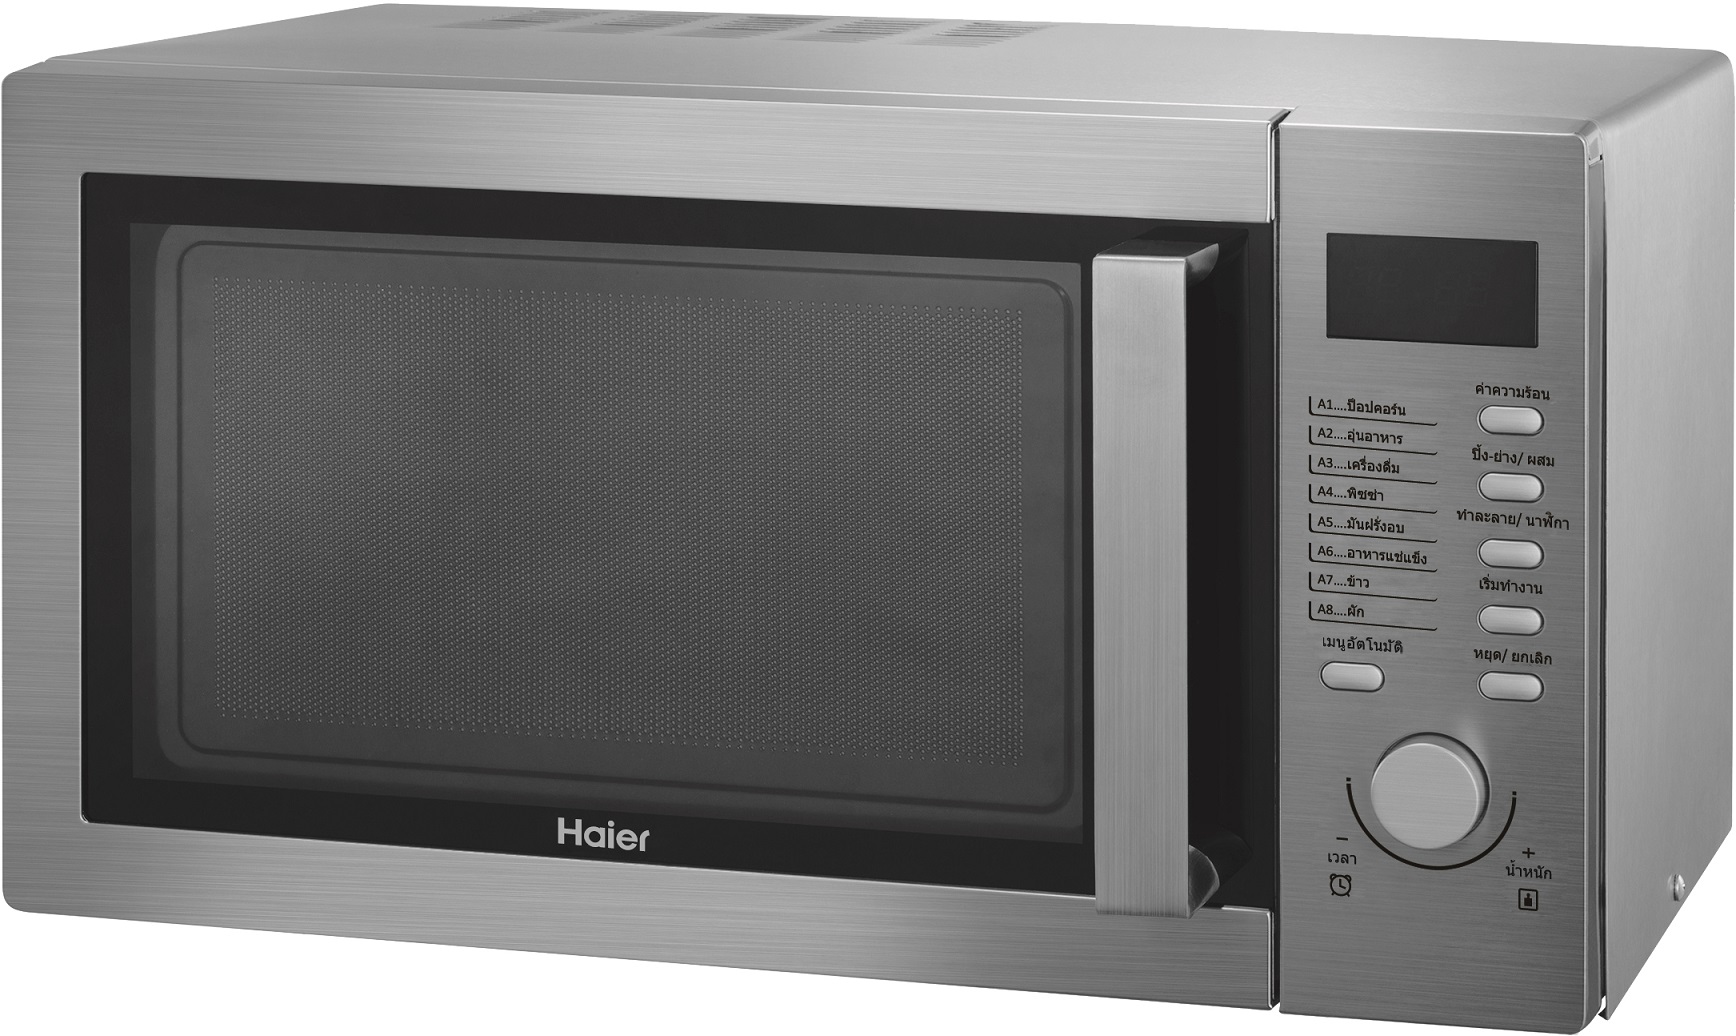 Microwave Oven - 8 Automatic Menu/Stainless Iron Appearance/Keys+Knob Control 